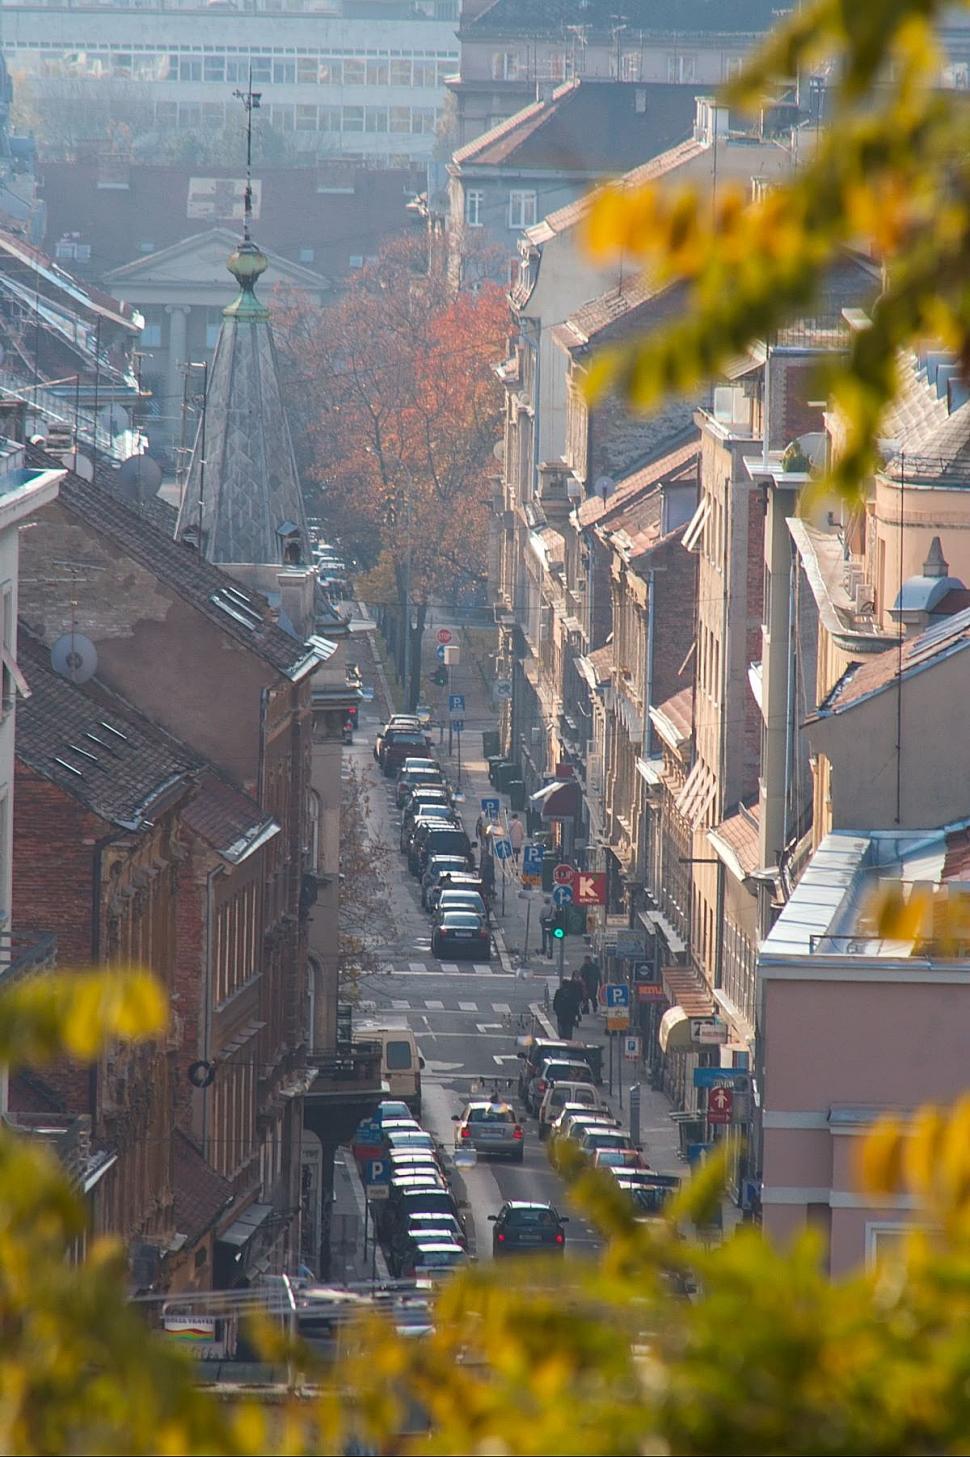 Free Image of The street 